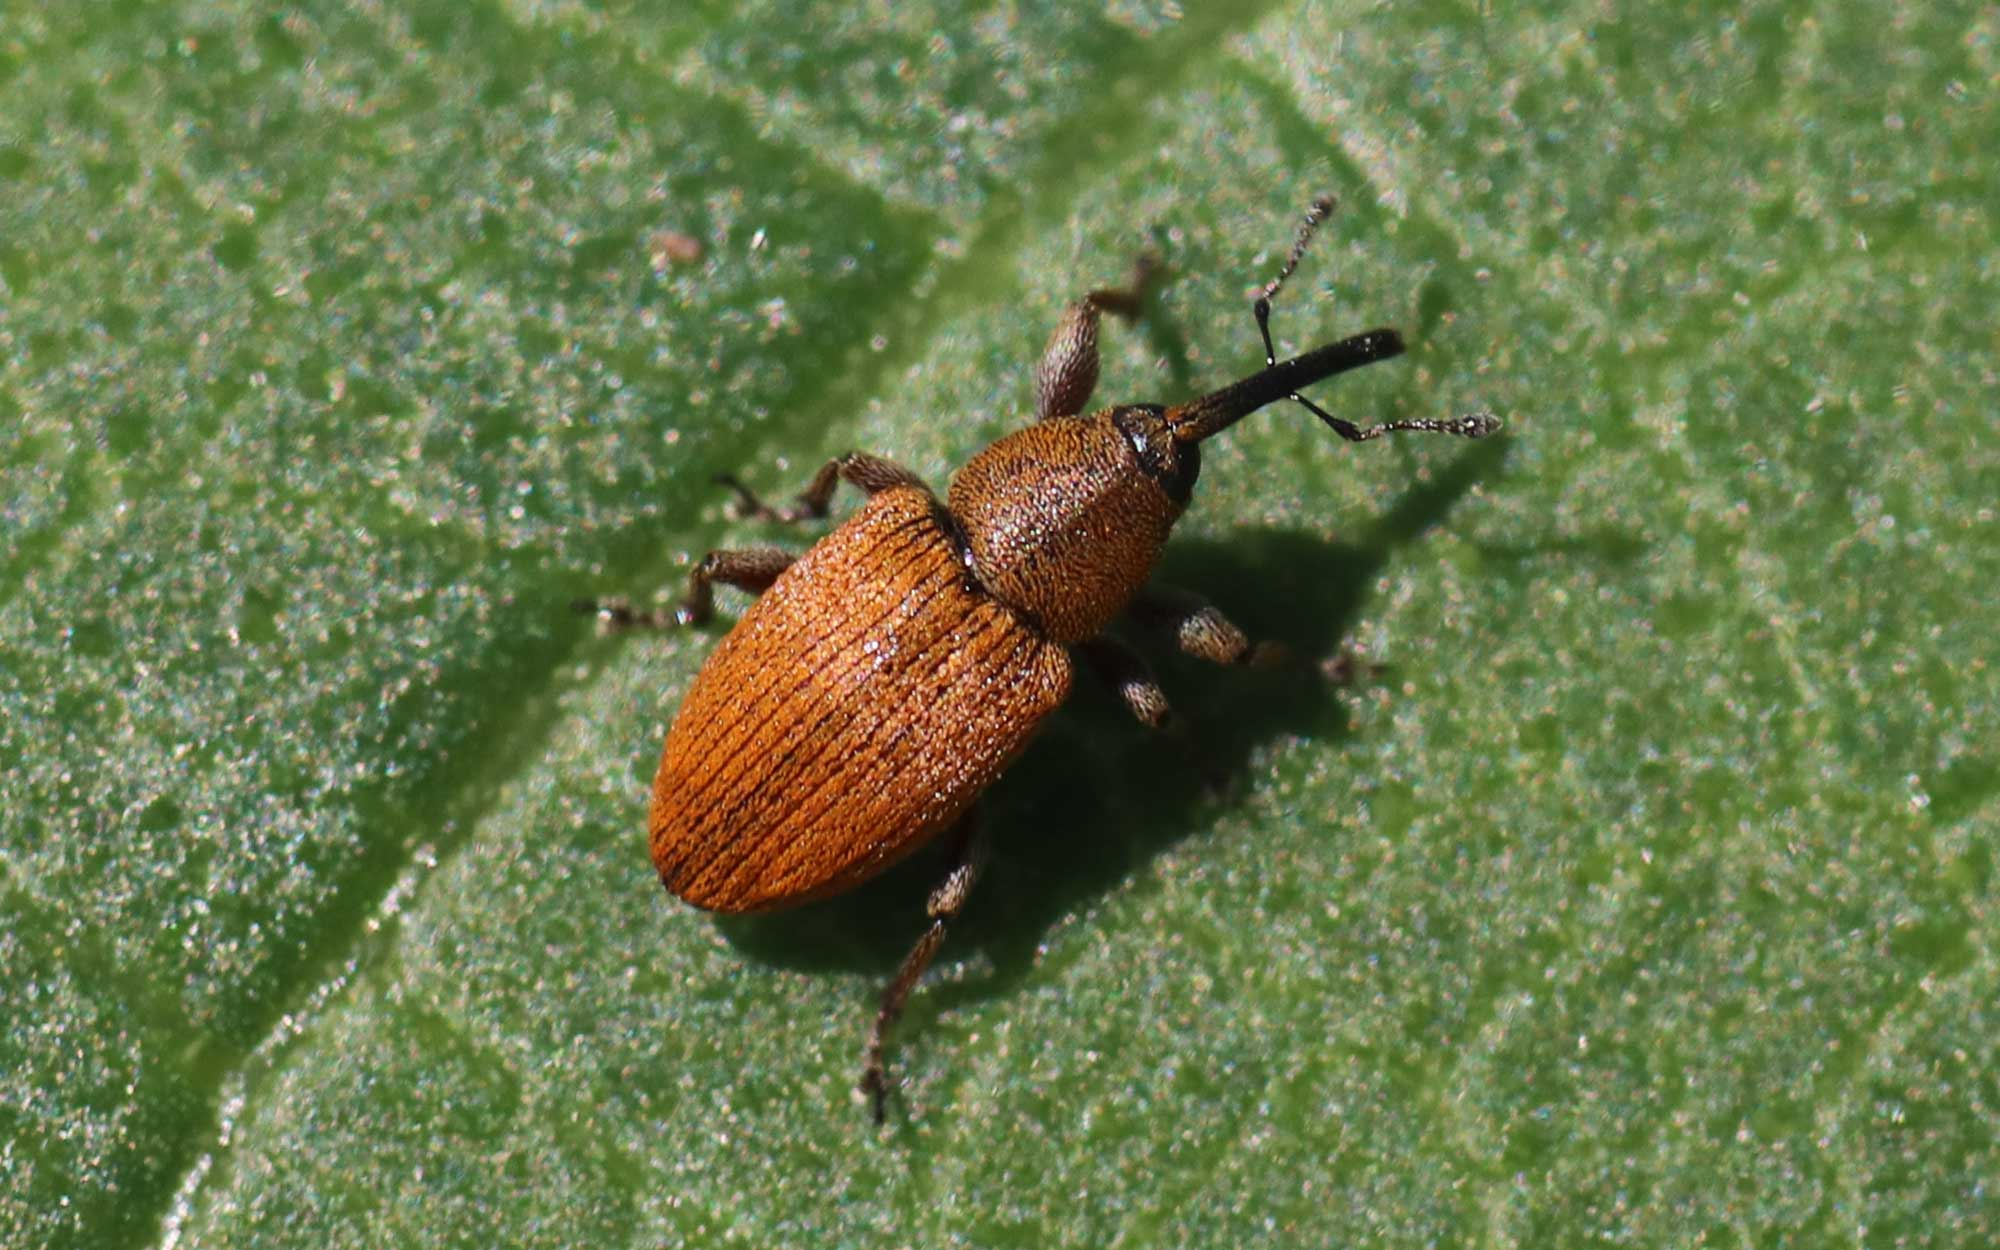 Red-brown colored weevil with bent antennae originating on the elongated mouthparts.